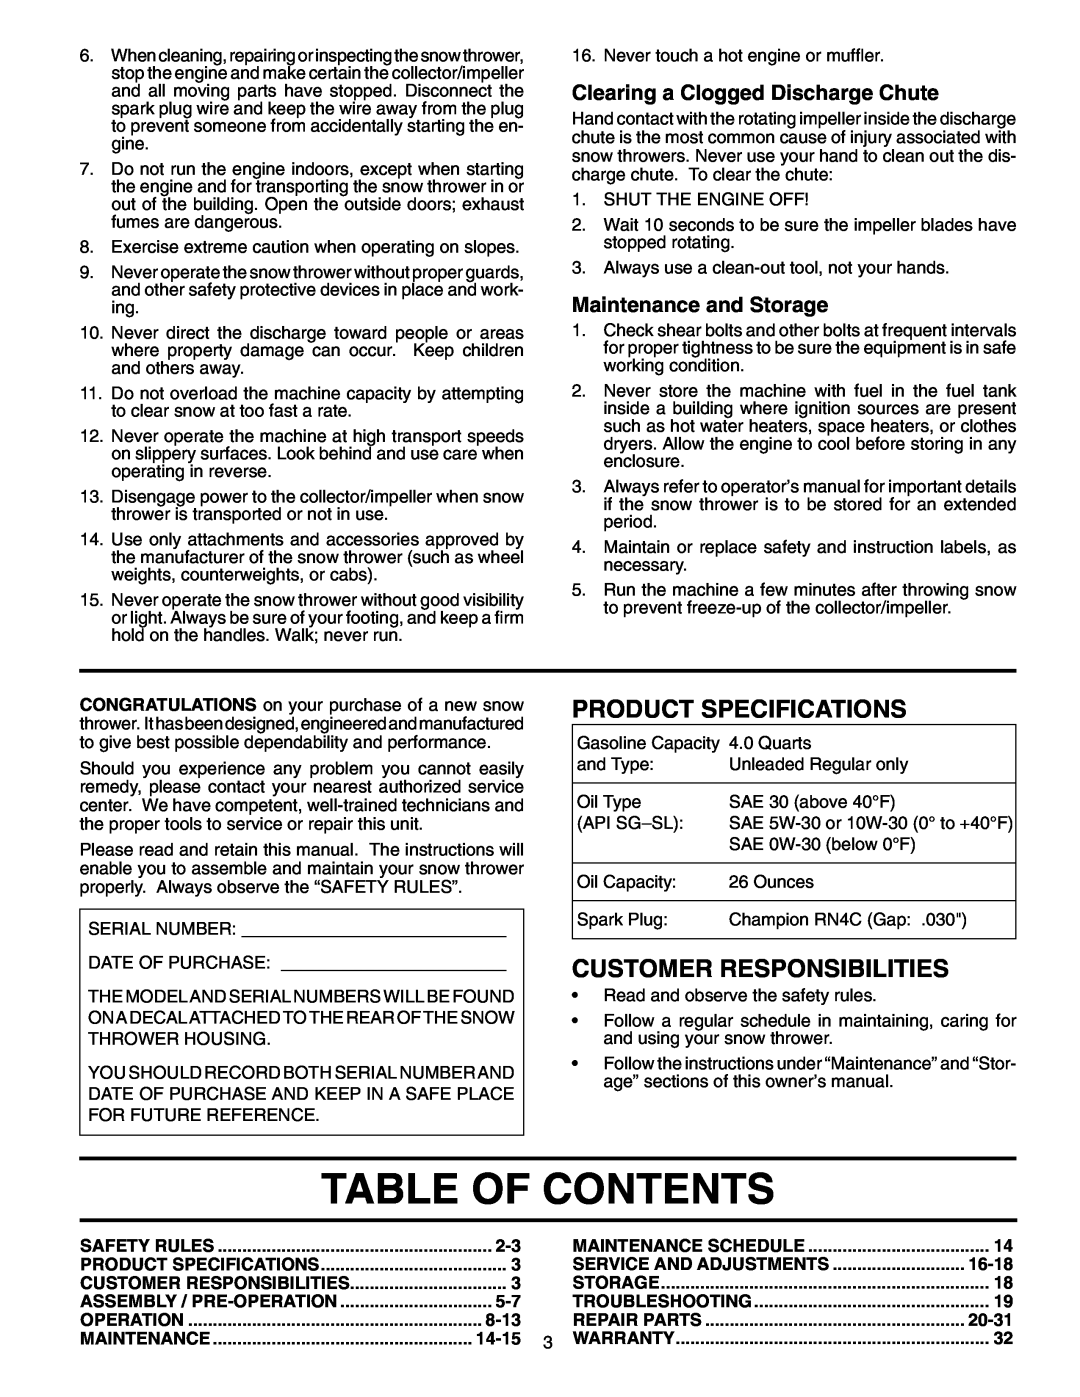 Poulan 199329 Table Of Contents, Clearing a Clogged Discharge Chute, Maintenance and Storage, Product Specifications, 8-13 